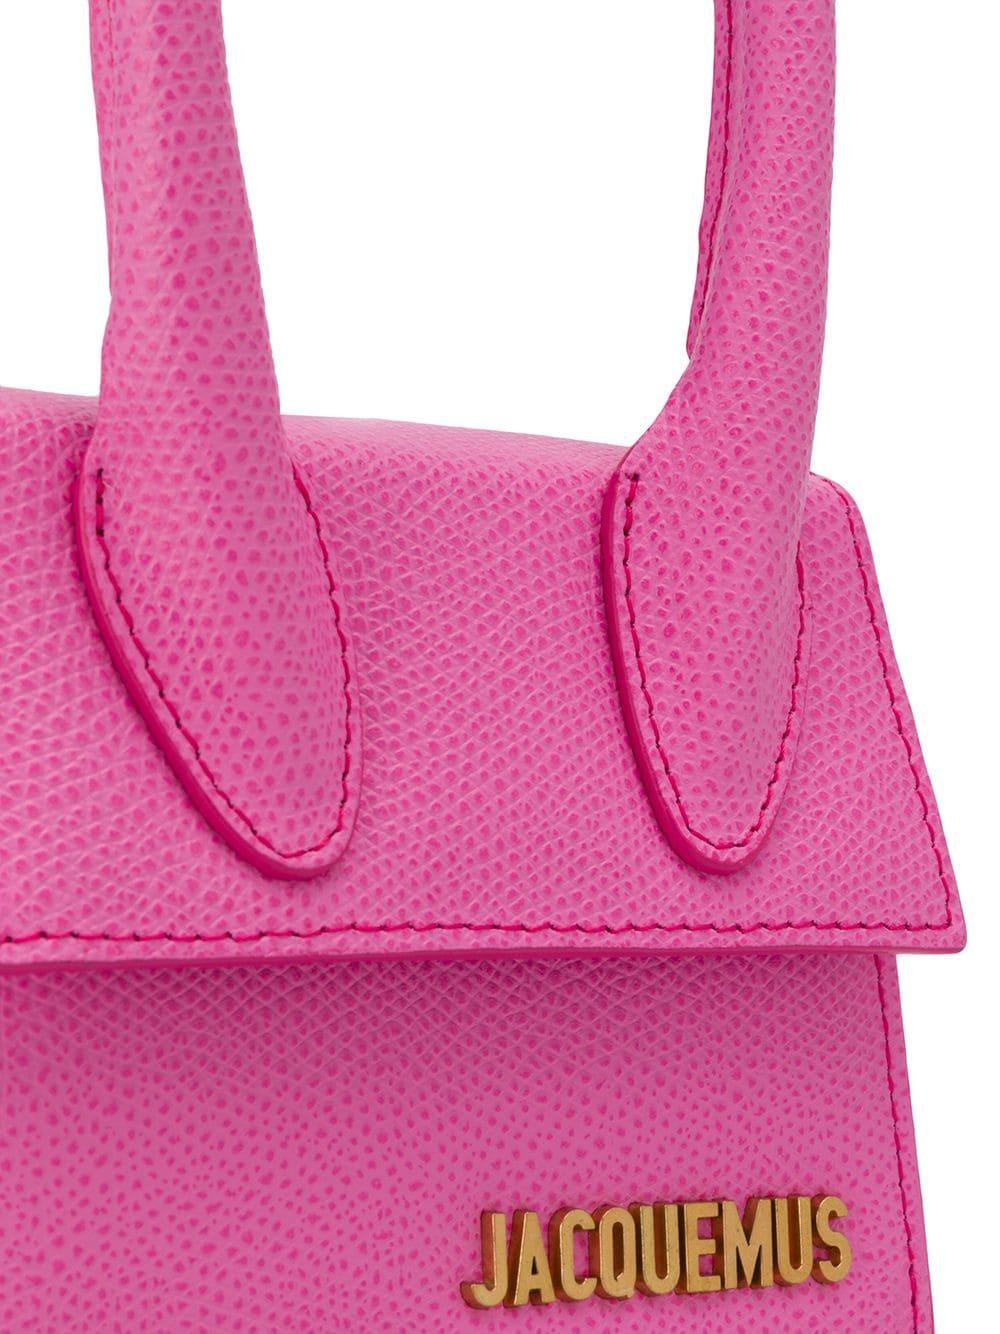 Jacquemus Le Chiquito Hand Bag in Pink | Lyst